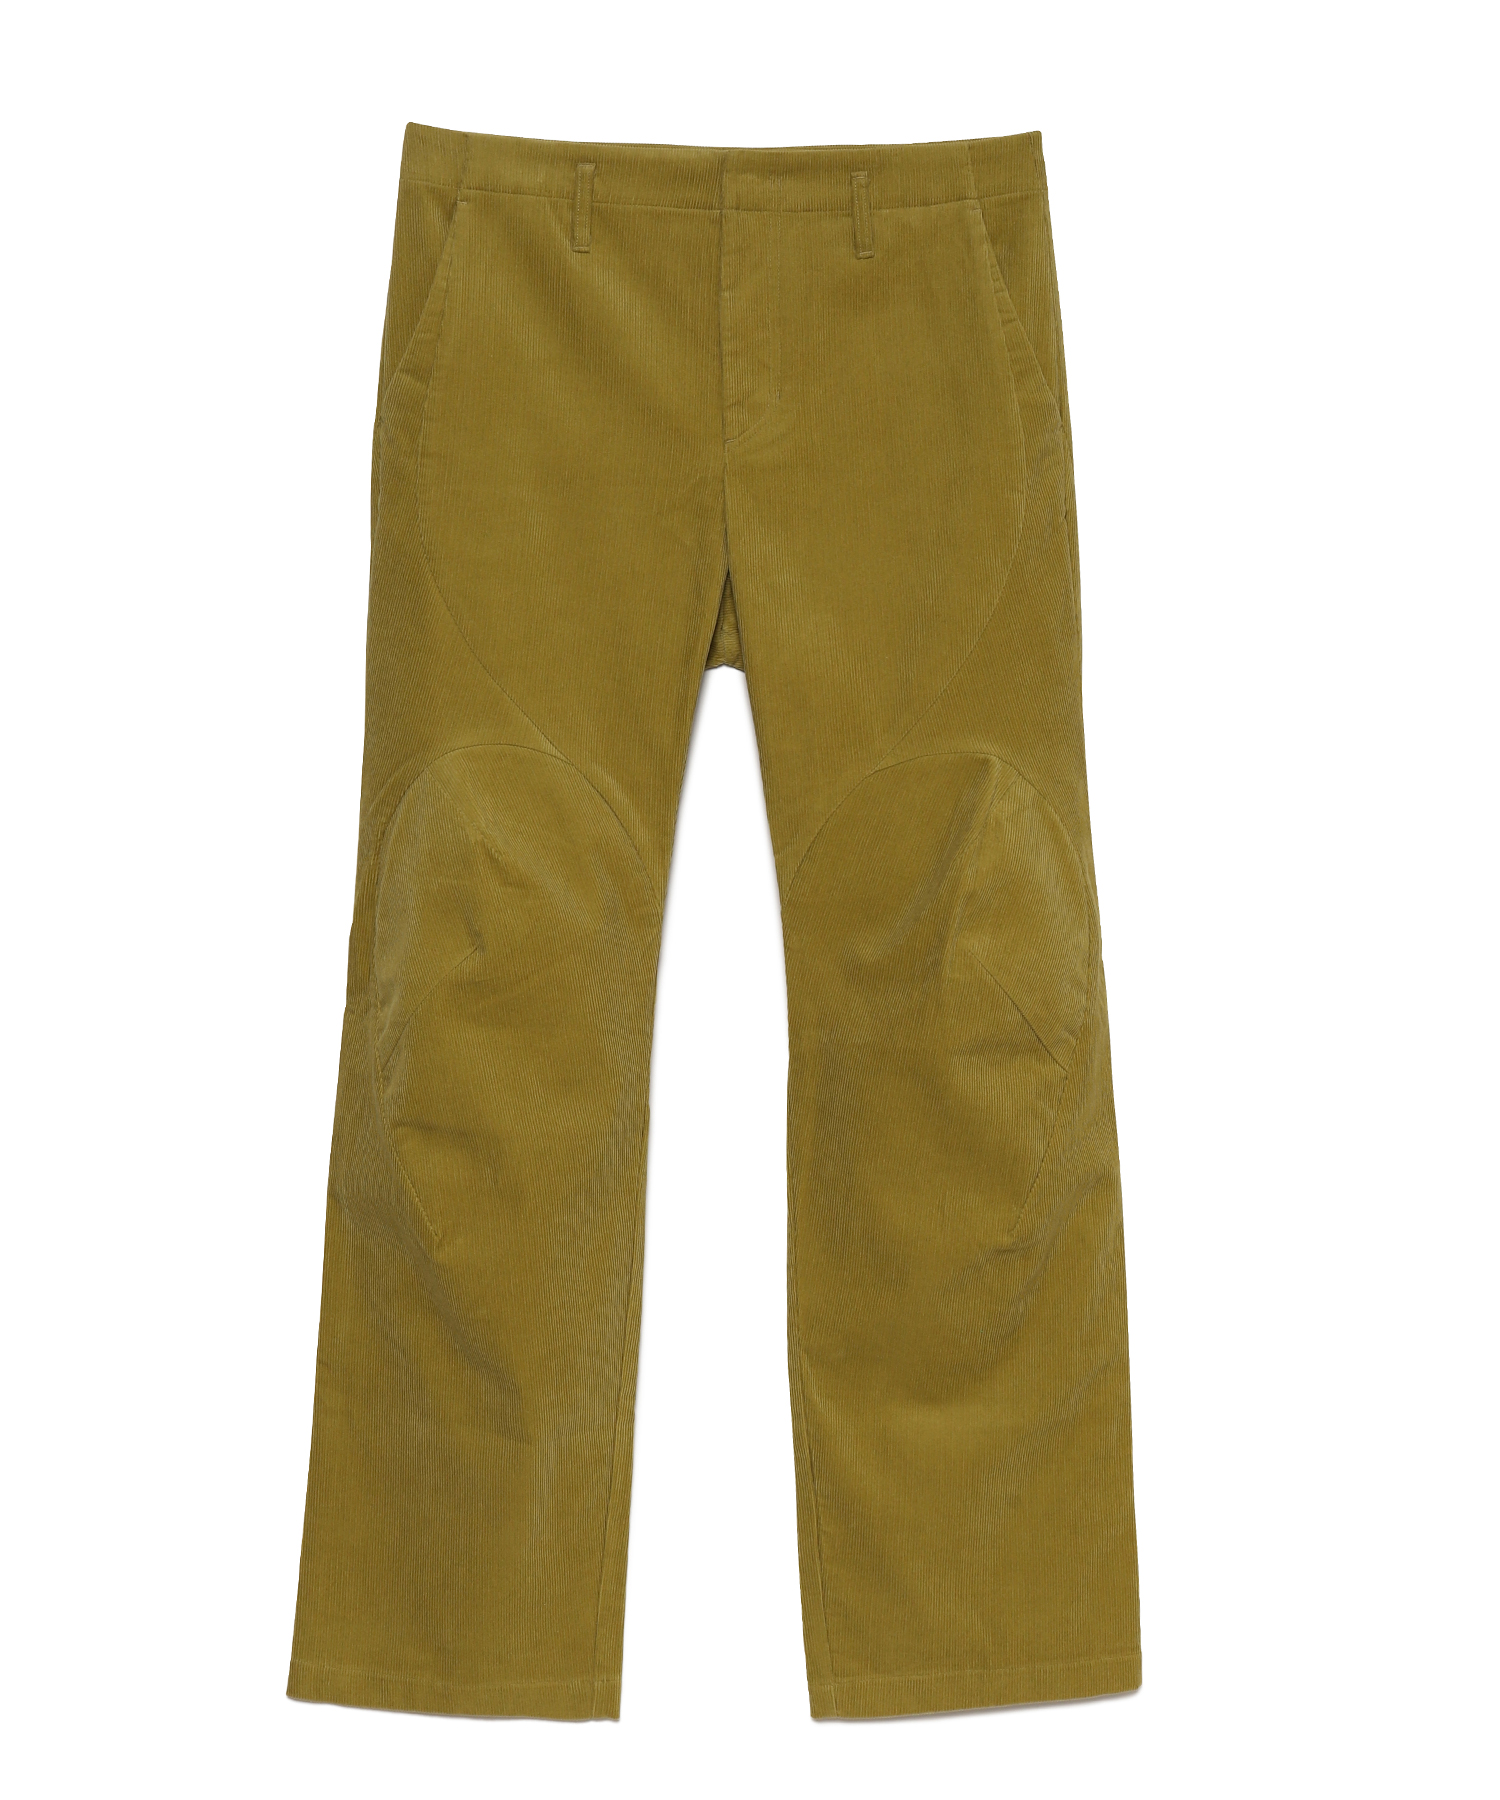 5.1 TROUSERS RIGHT YELLOW（POST ARCHIVE FACTION (PAF)）｜TATRAS